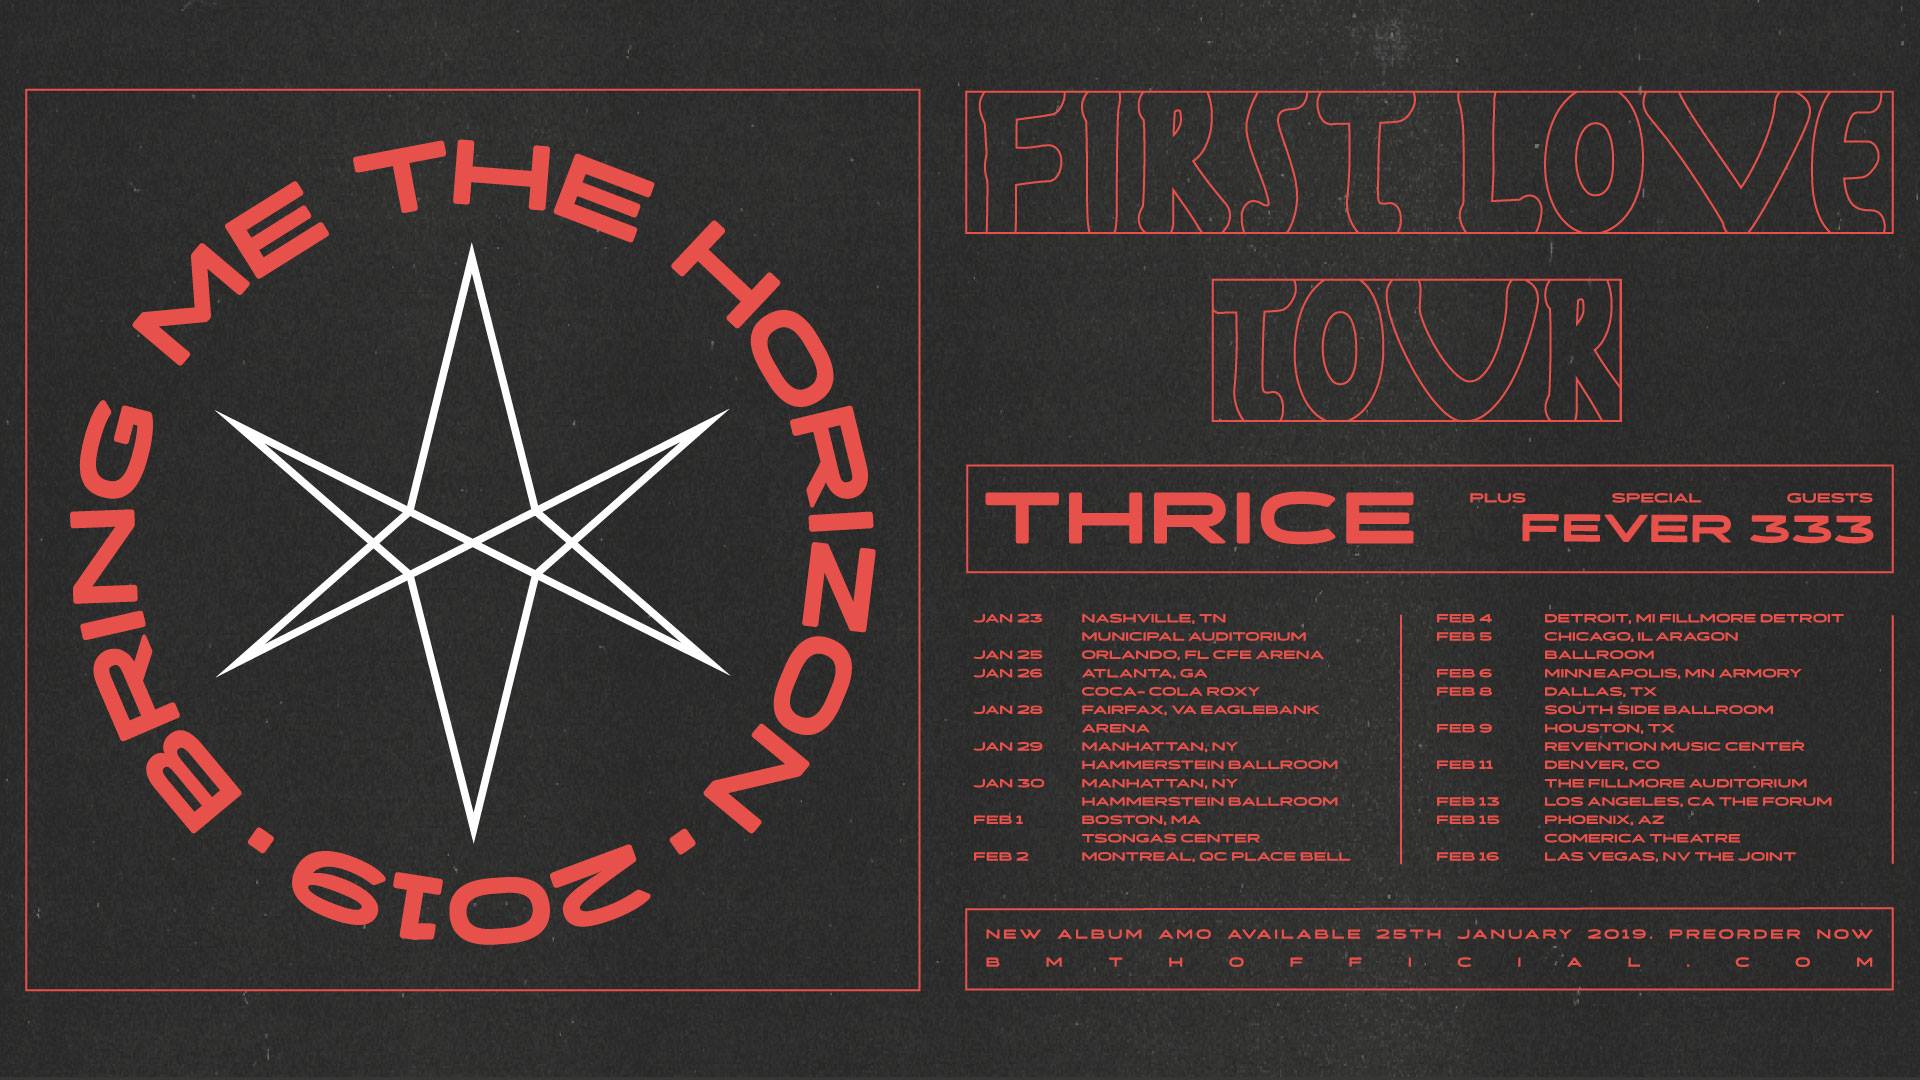 Bring Me The Horizon plus special guests Thrice & Fever 333